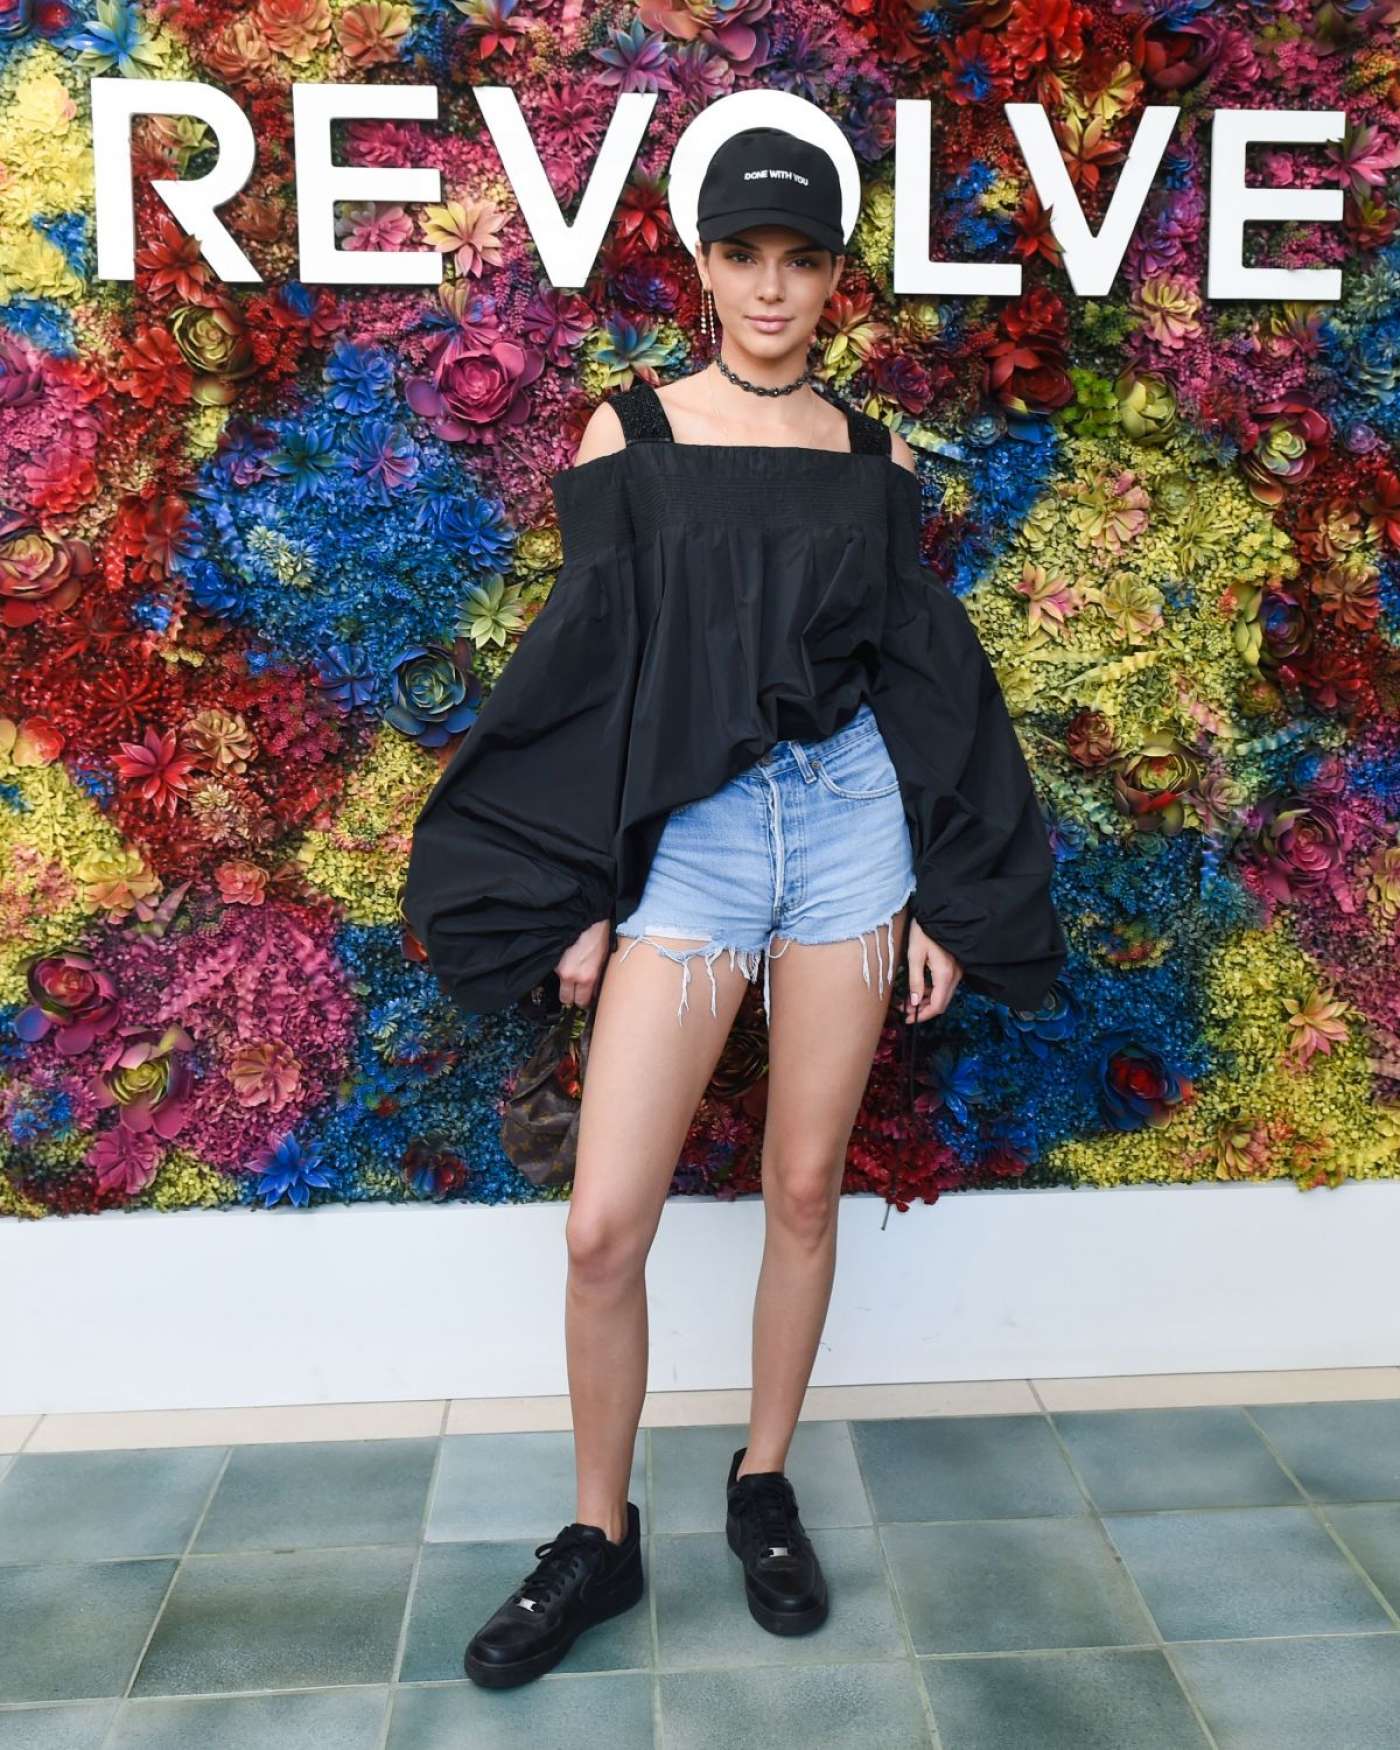 Kendall Jenner - Revolve Festival Day 2 at 2017 Coachella in Indio